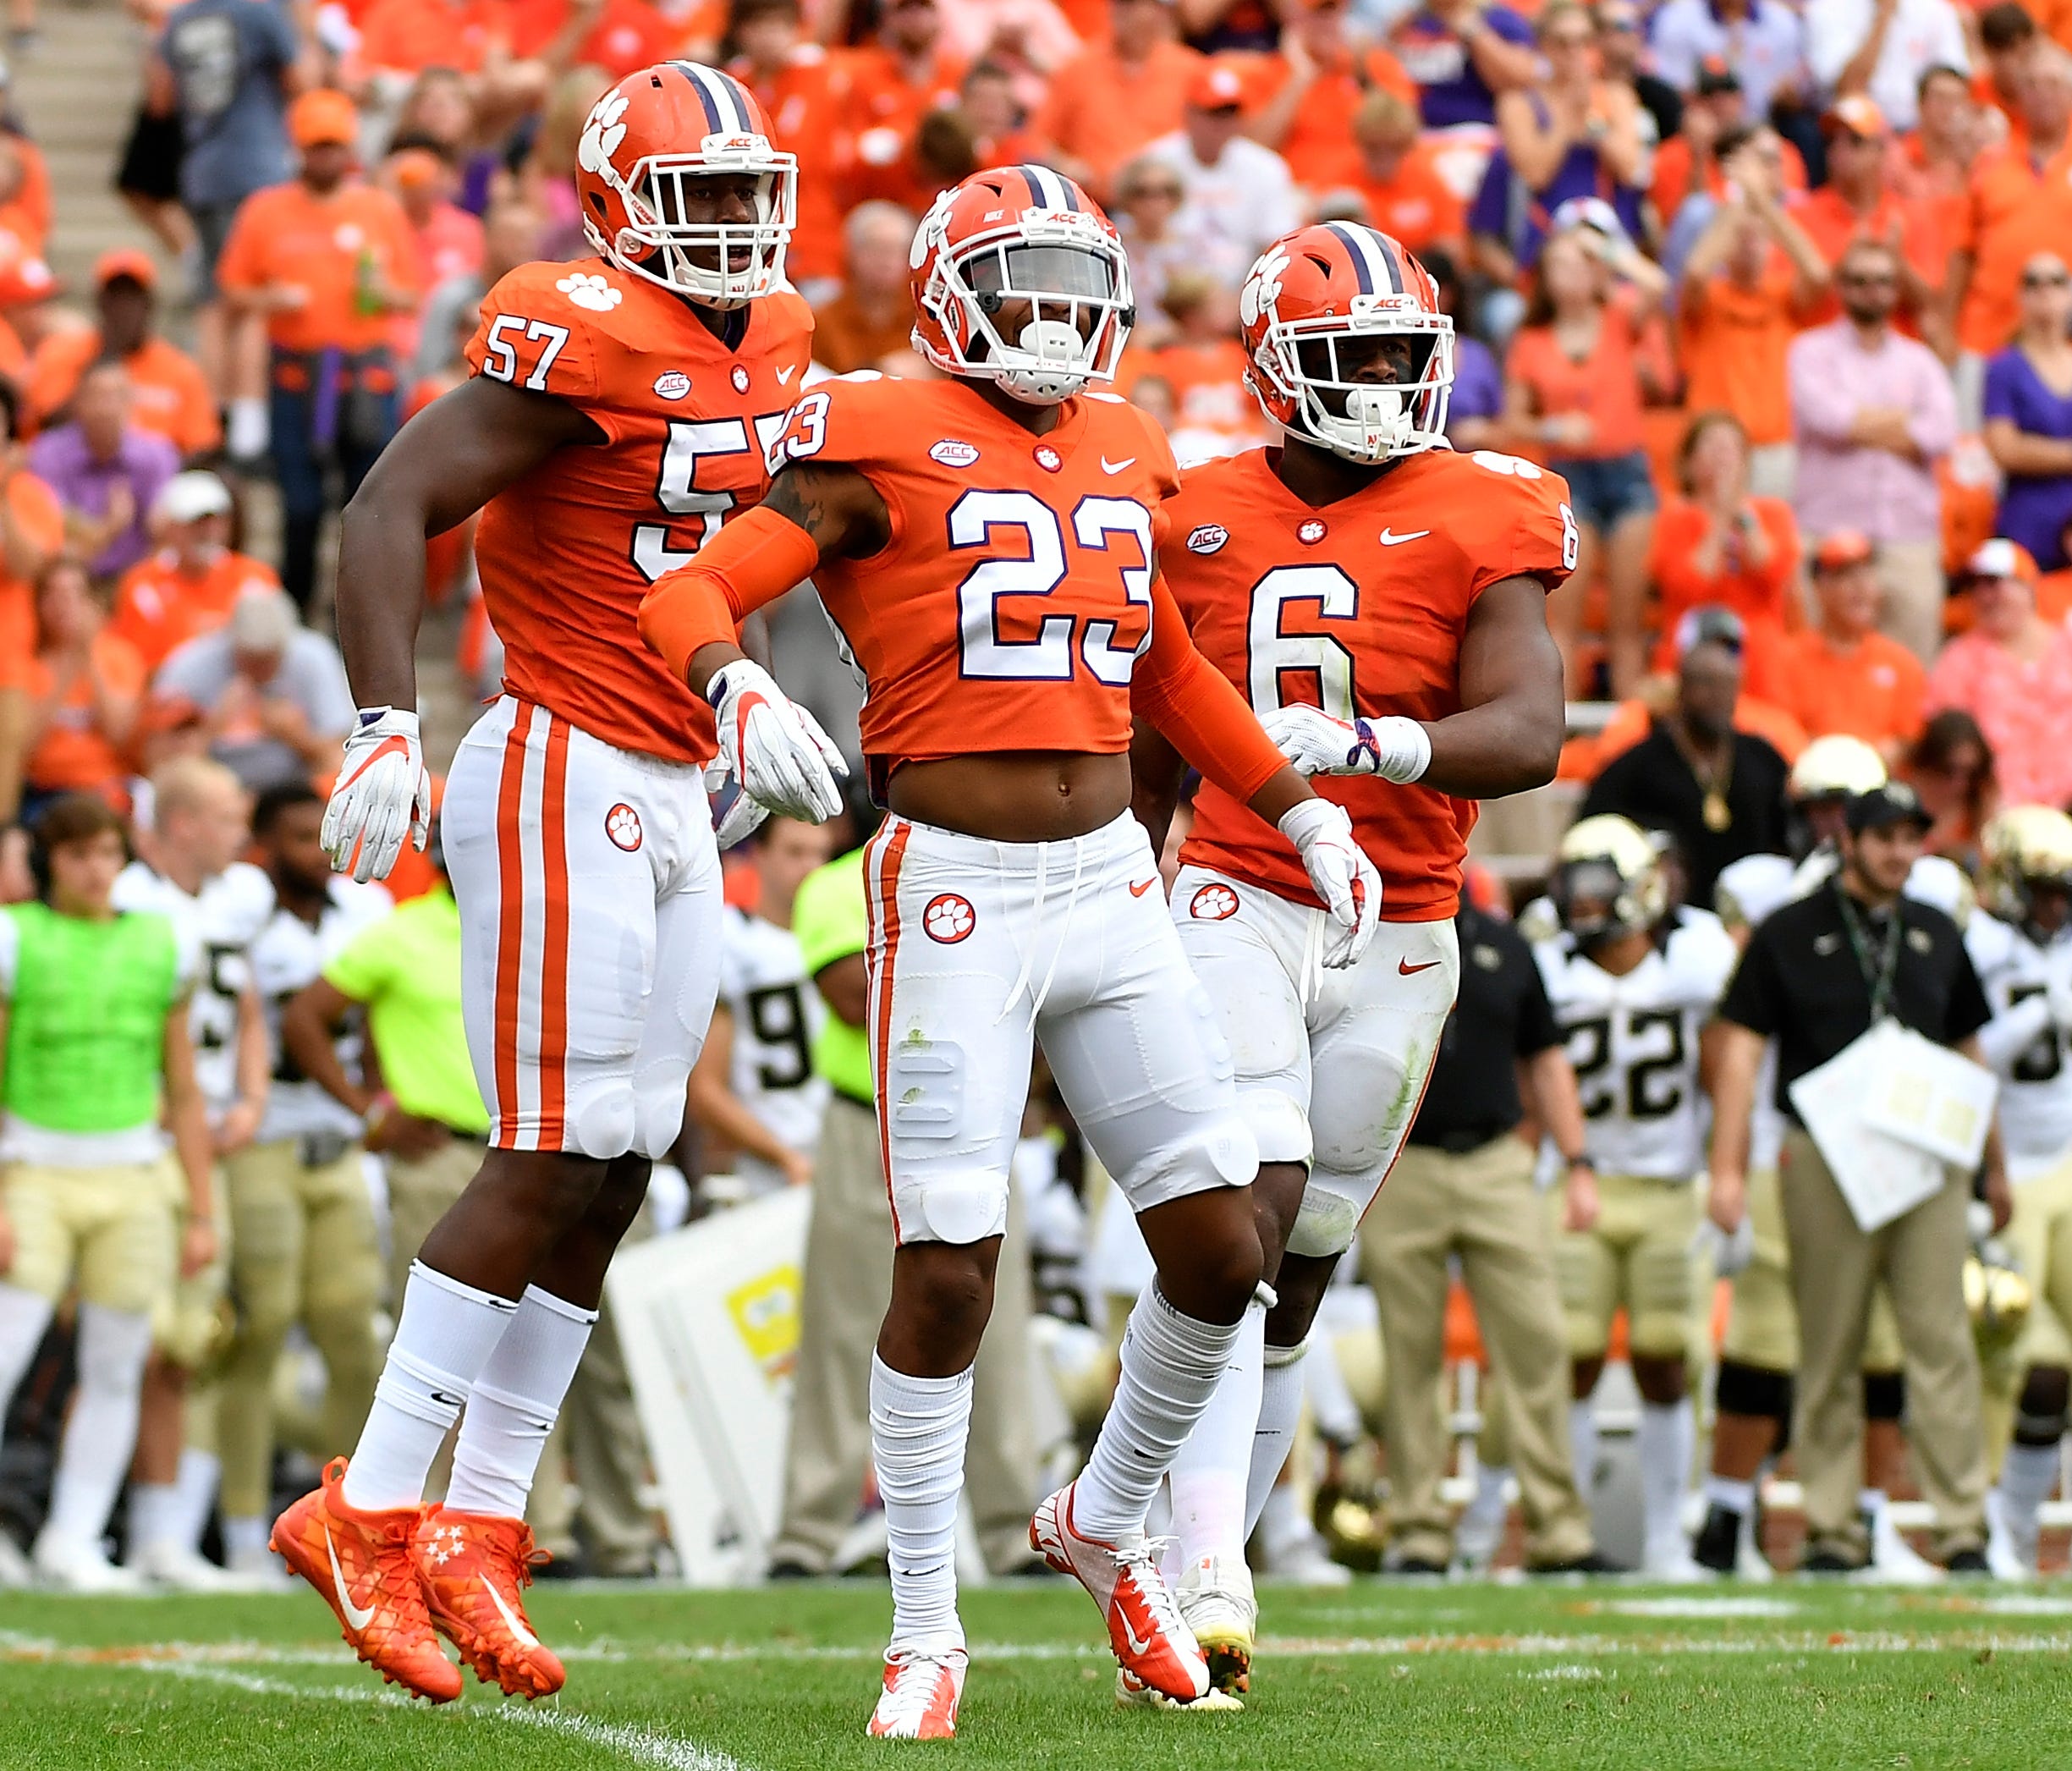 Clemson players celebrate during their game against the Wake Forest.